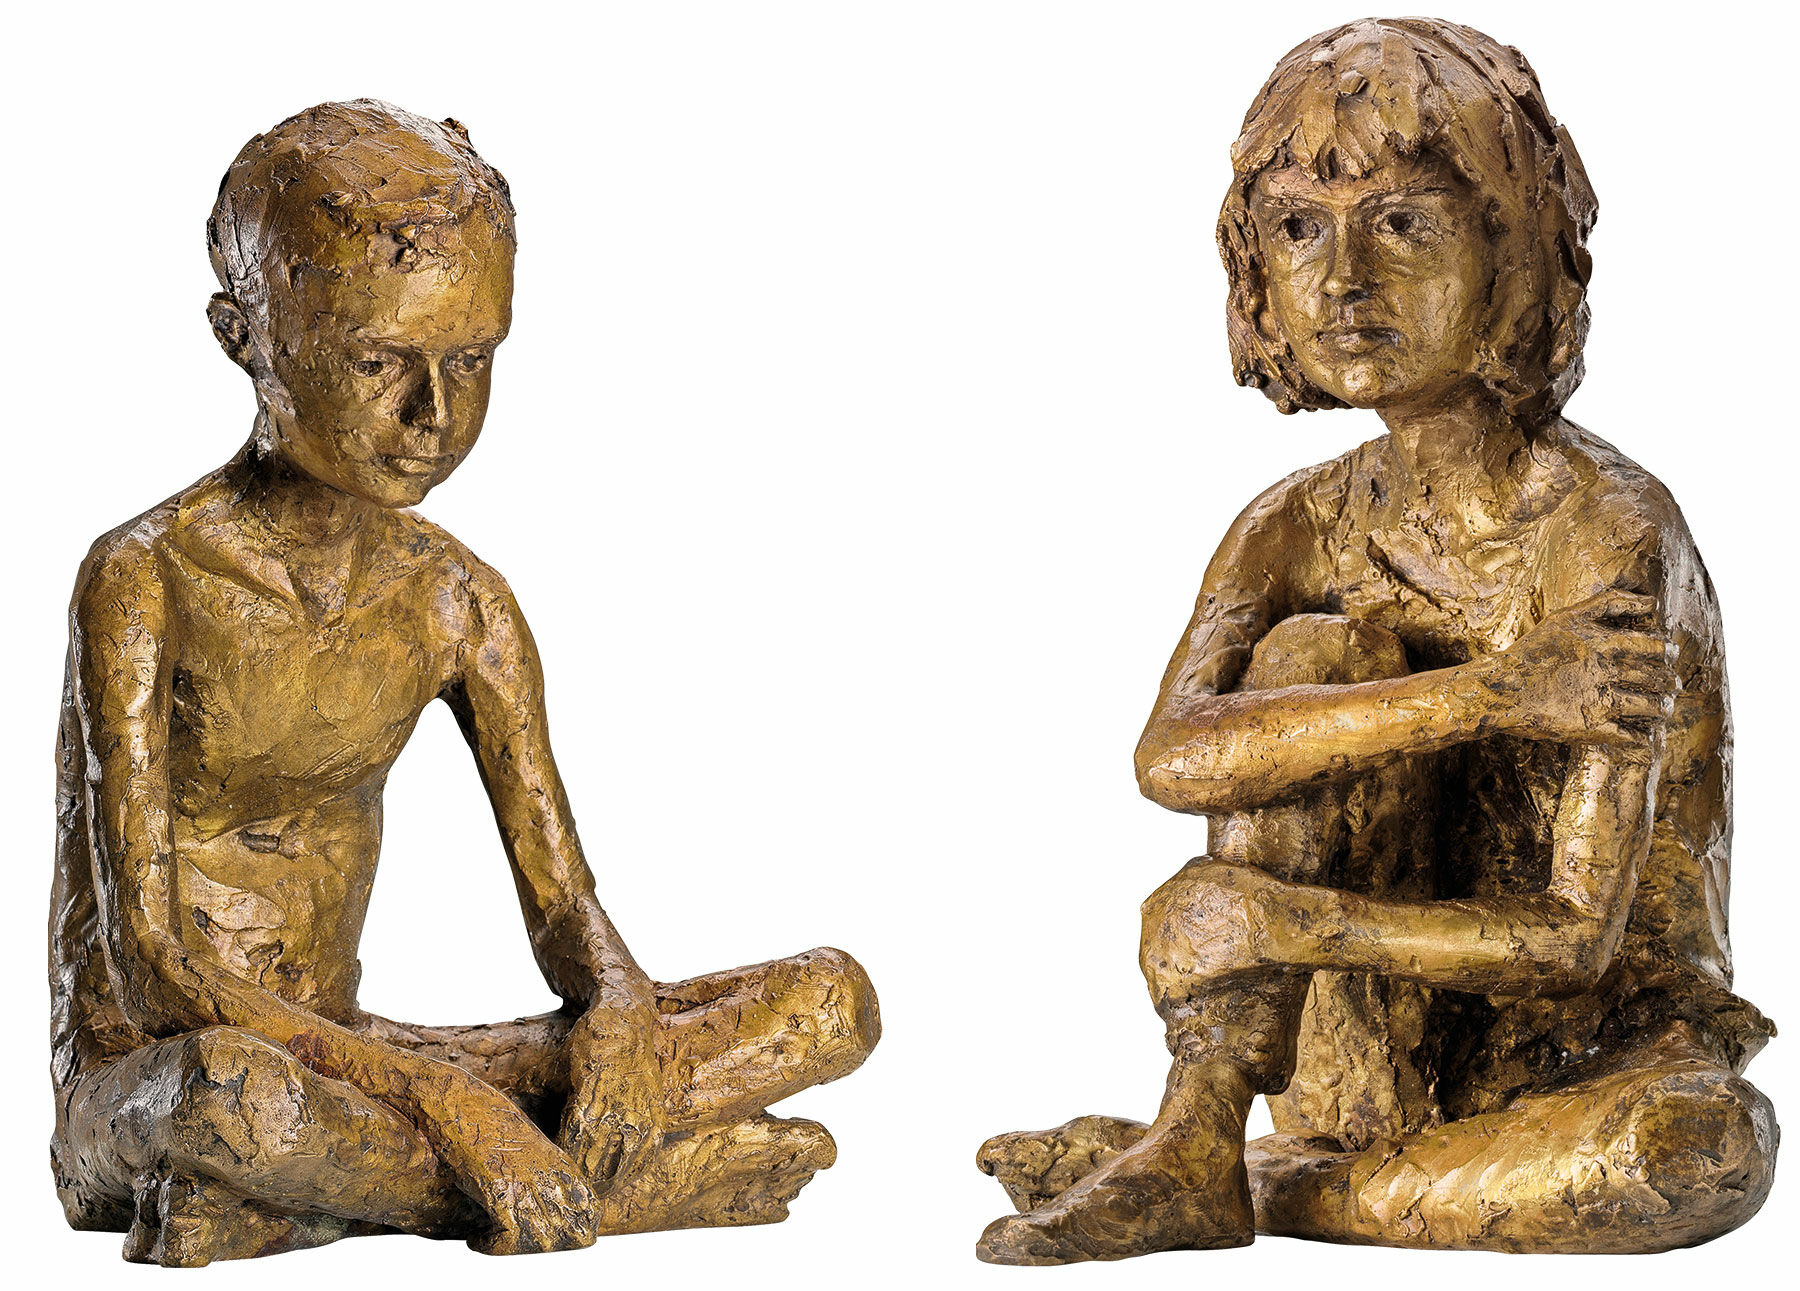 Set of 2 sculptures "Paul" and "Martha", bronze by Valerie Otte